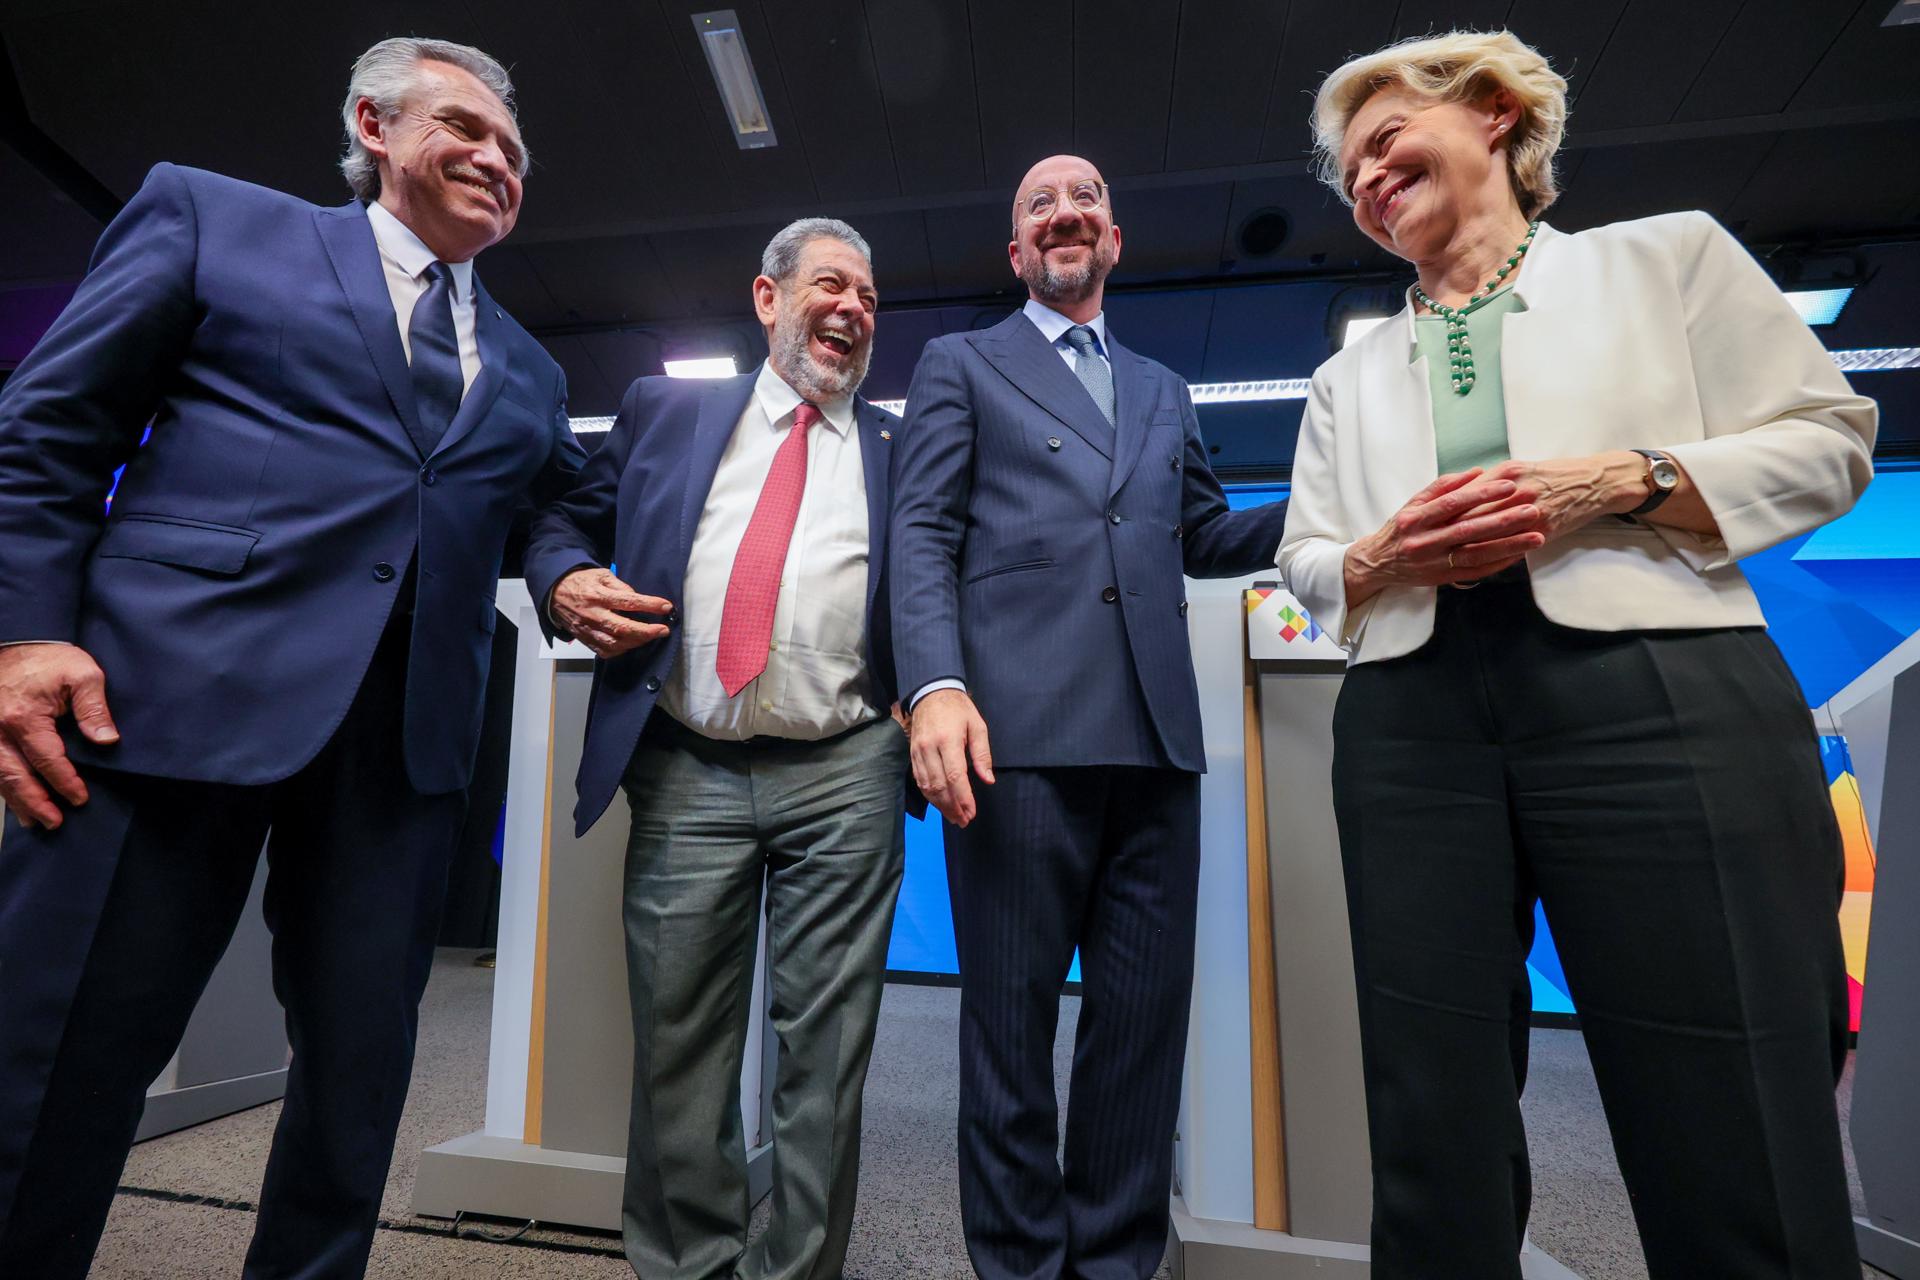 (From left to right) Argentine President Alberto Fernandez, Saint Vincent and the Grenadines Prime Minister Ralph Gonsalves, European Council President Charles Michel and European Commission President Ursula von der Leyen shake hands after the EU-CELAC Summit of Heads of State and Government meeting in Brussels, Belgium, 18 July 2023. Leaders from the EU and the Community of Latin American and Caribbean States (CELAC) gathered in Brussels for the third EU-CELAC summit from 17-18 July 2023, with the aim of strengthening relations between both regions. EFE/EPA/OLIVIER MATTHYS
